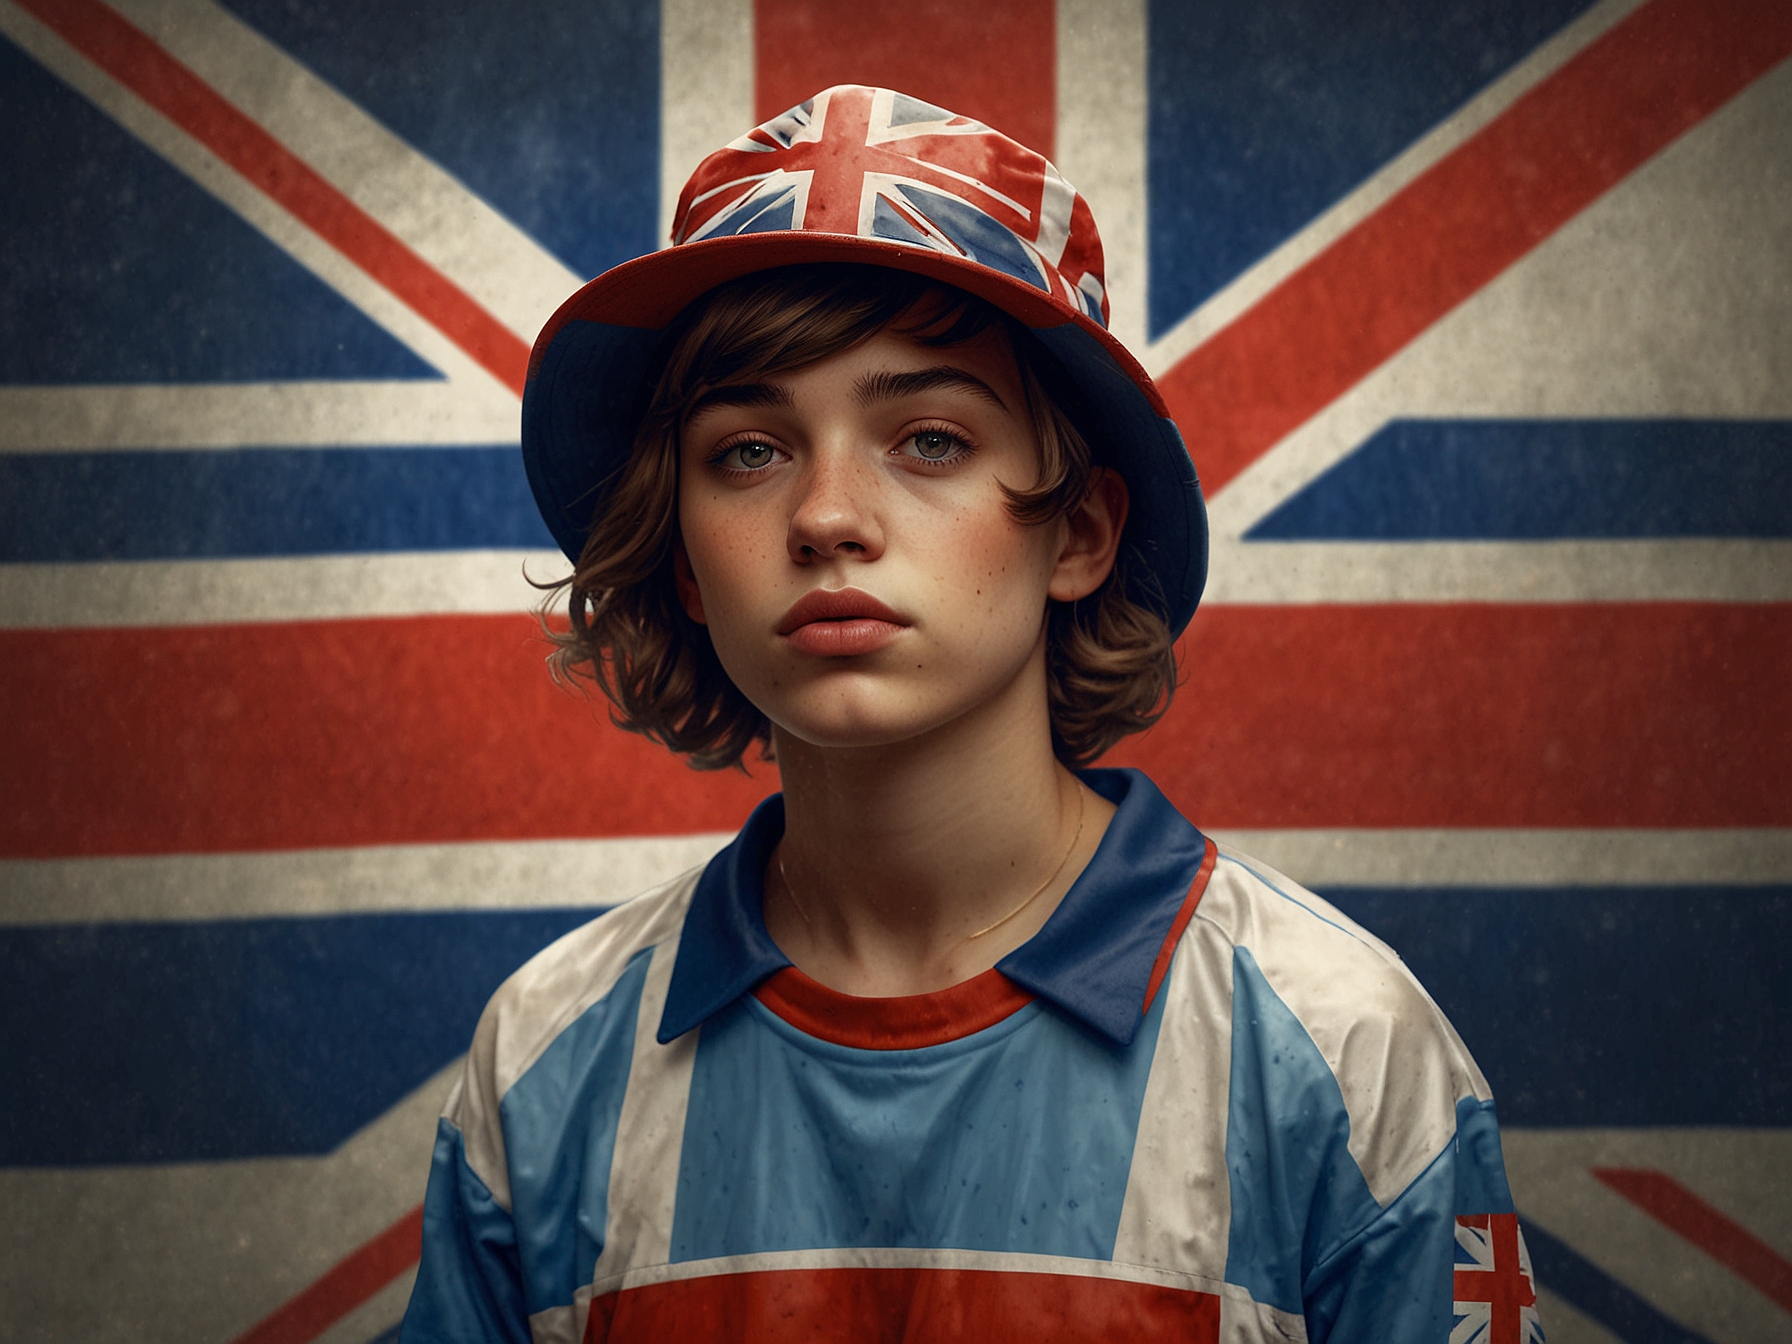 A fashionable young person wearing a vintage football jersey and a bucket hat, showcasing the blokecore style. The outfit features the Union Jack prominently, symbolizing the resurgence of British pride.